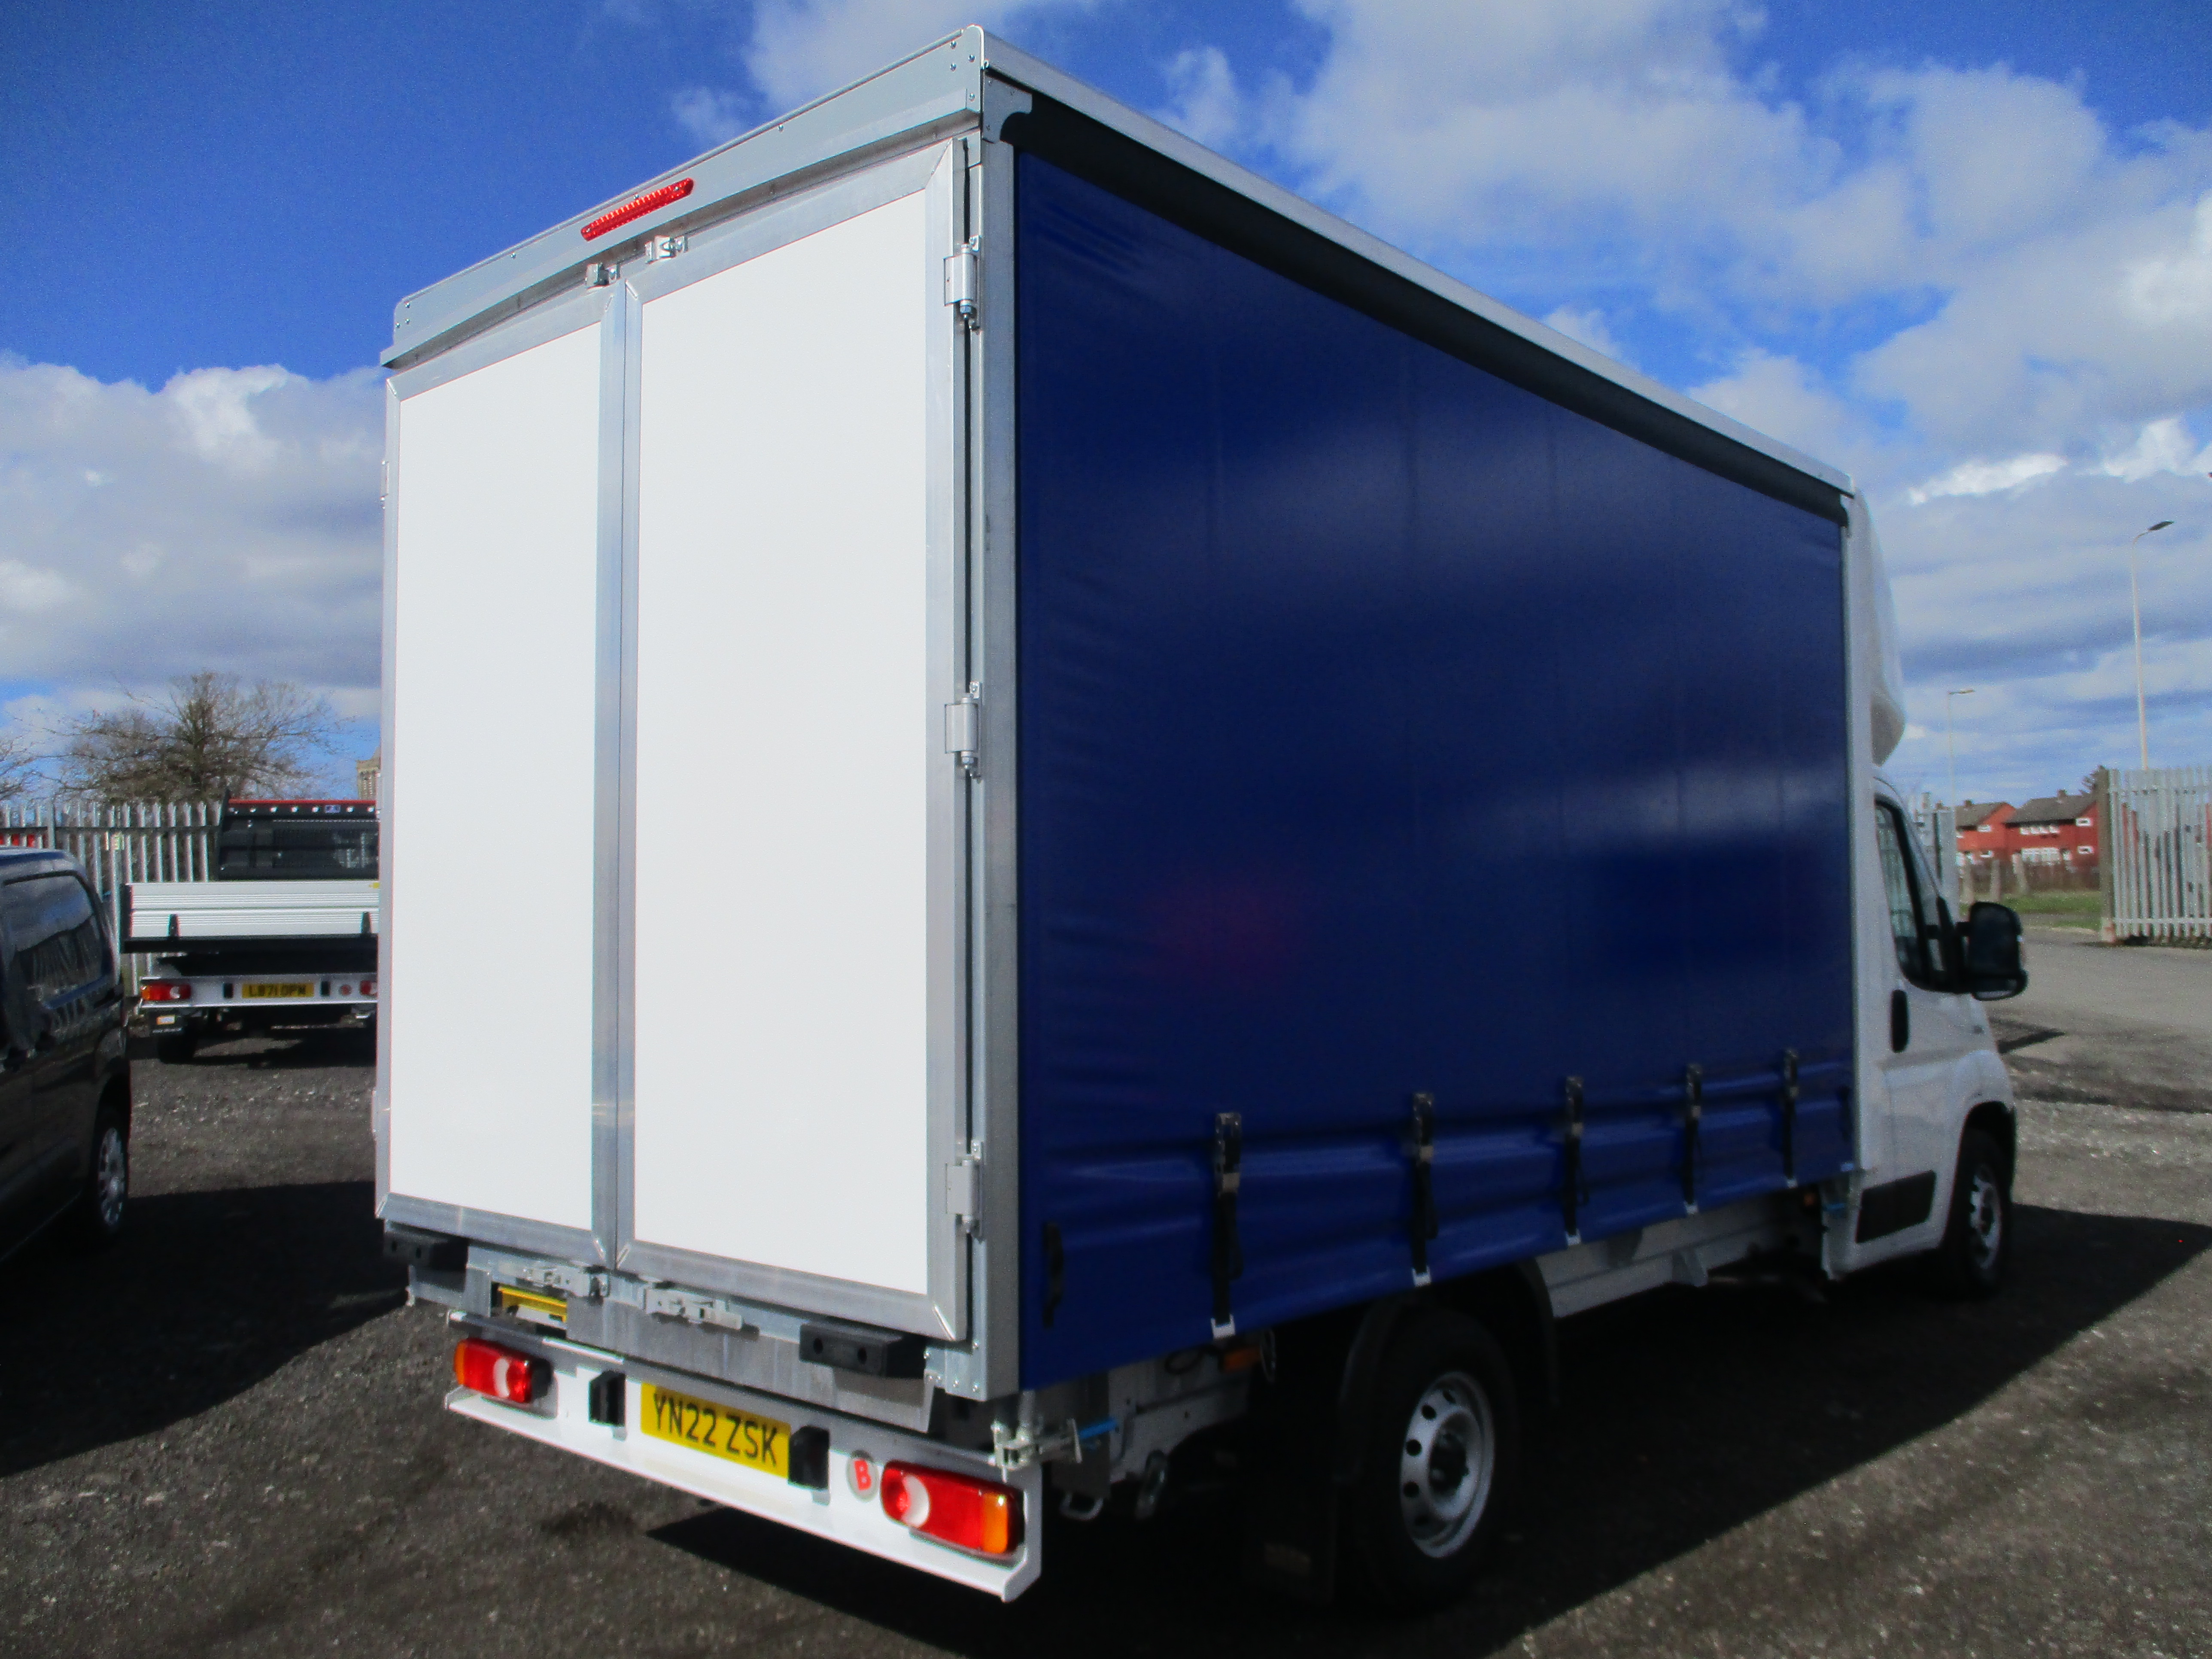 Fiat Ducato Curtainsider Series 8 with Barn Doors 2.3 Diesel 140PS, BIG SPEC including Air Con ( £1,000 OFF RRP )